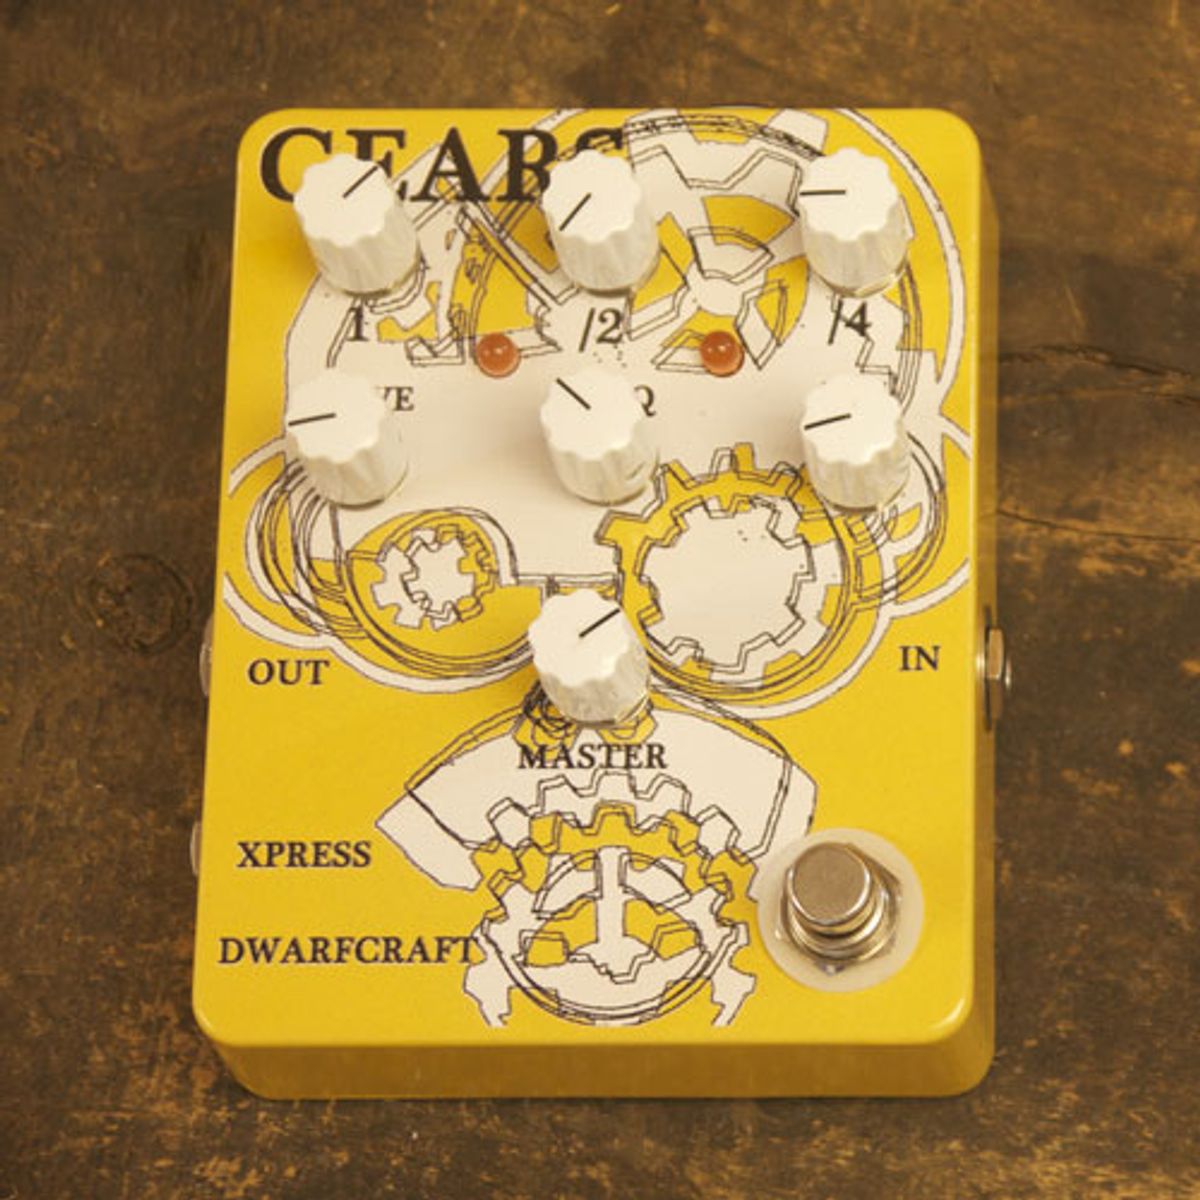 Dwarfcraft Devices Announces the Gears